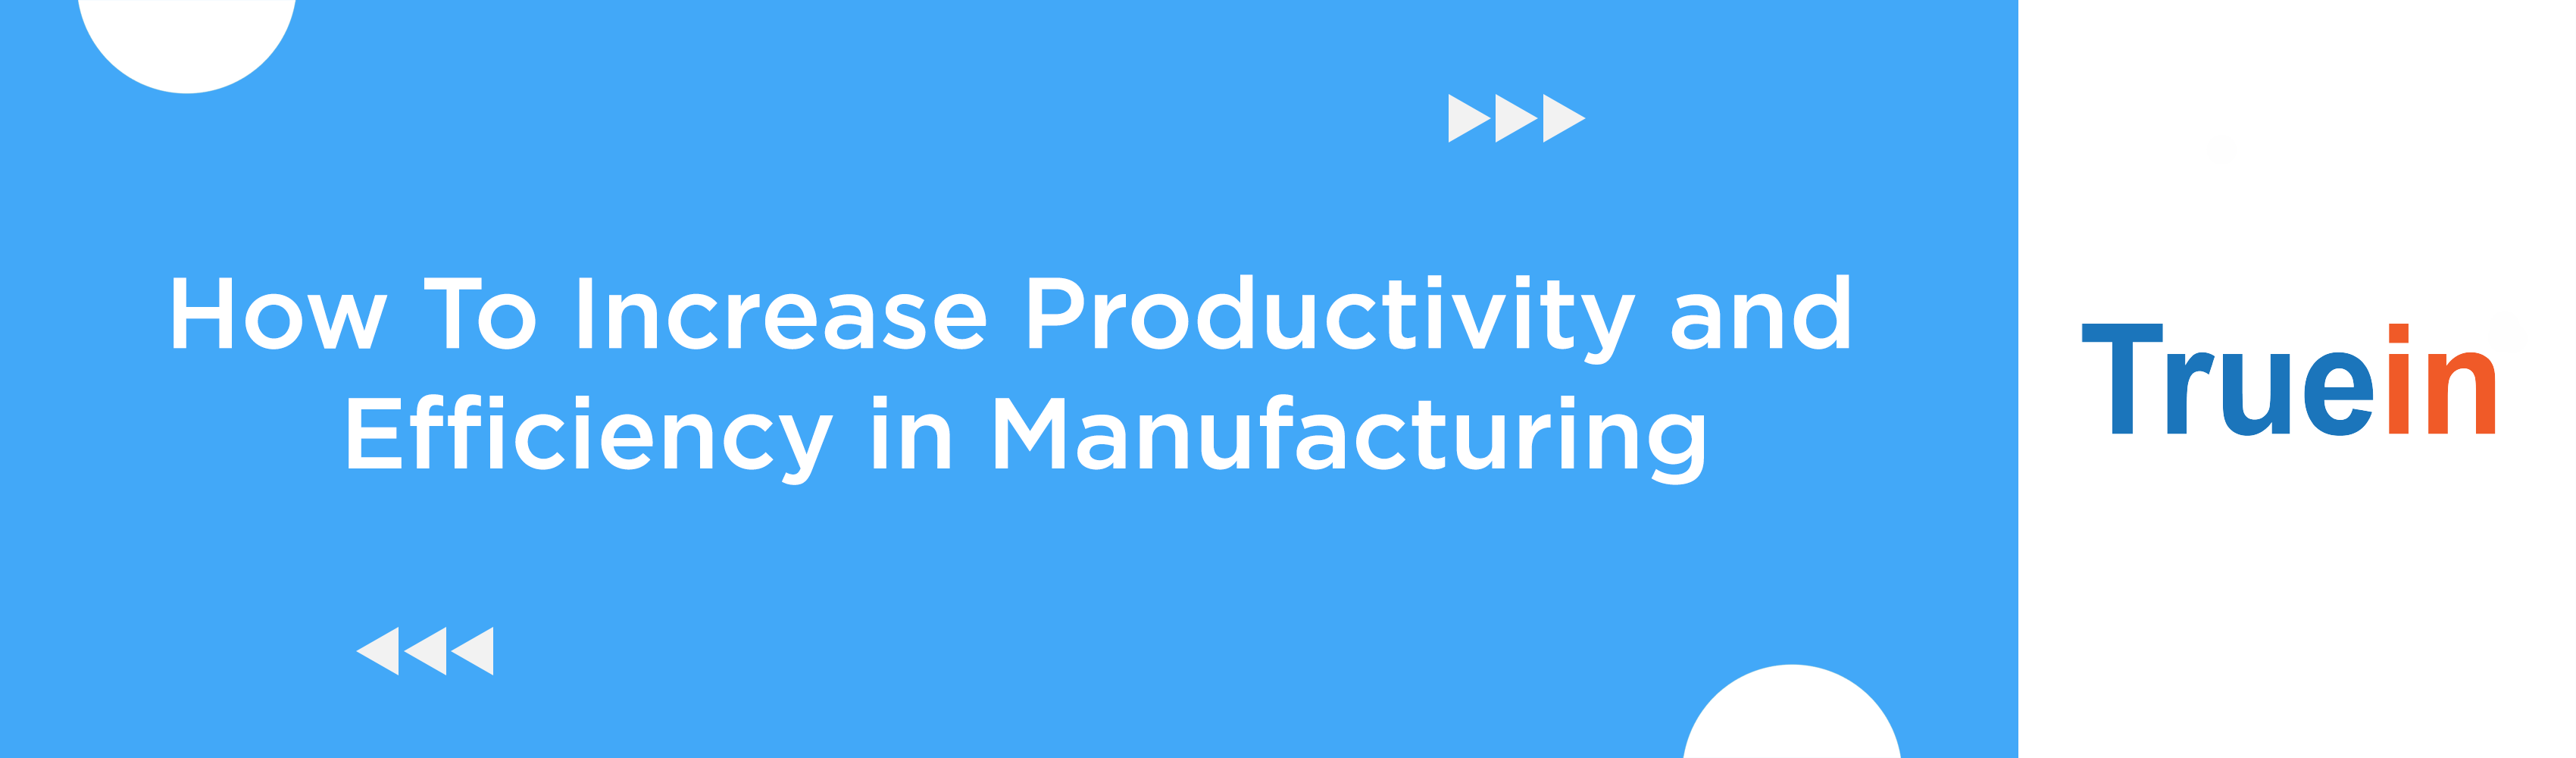 How To Increase Productivity and Efficiency in Manufacturing